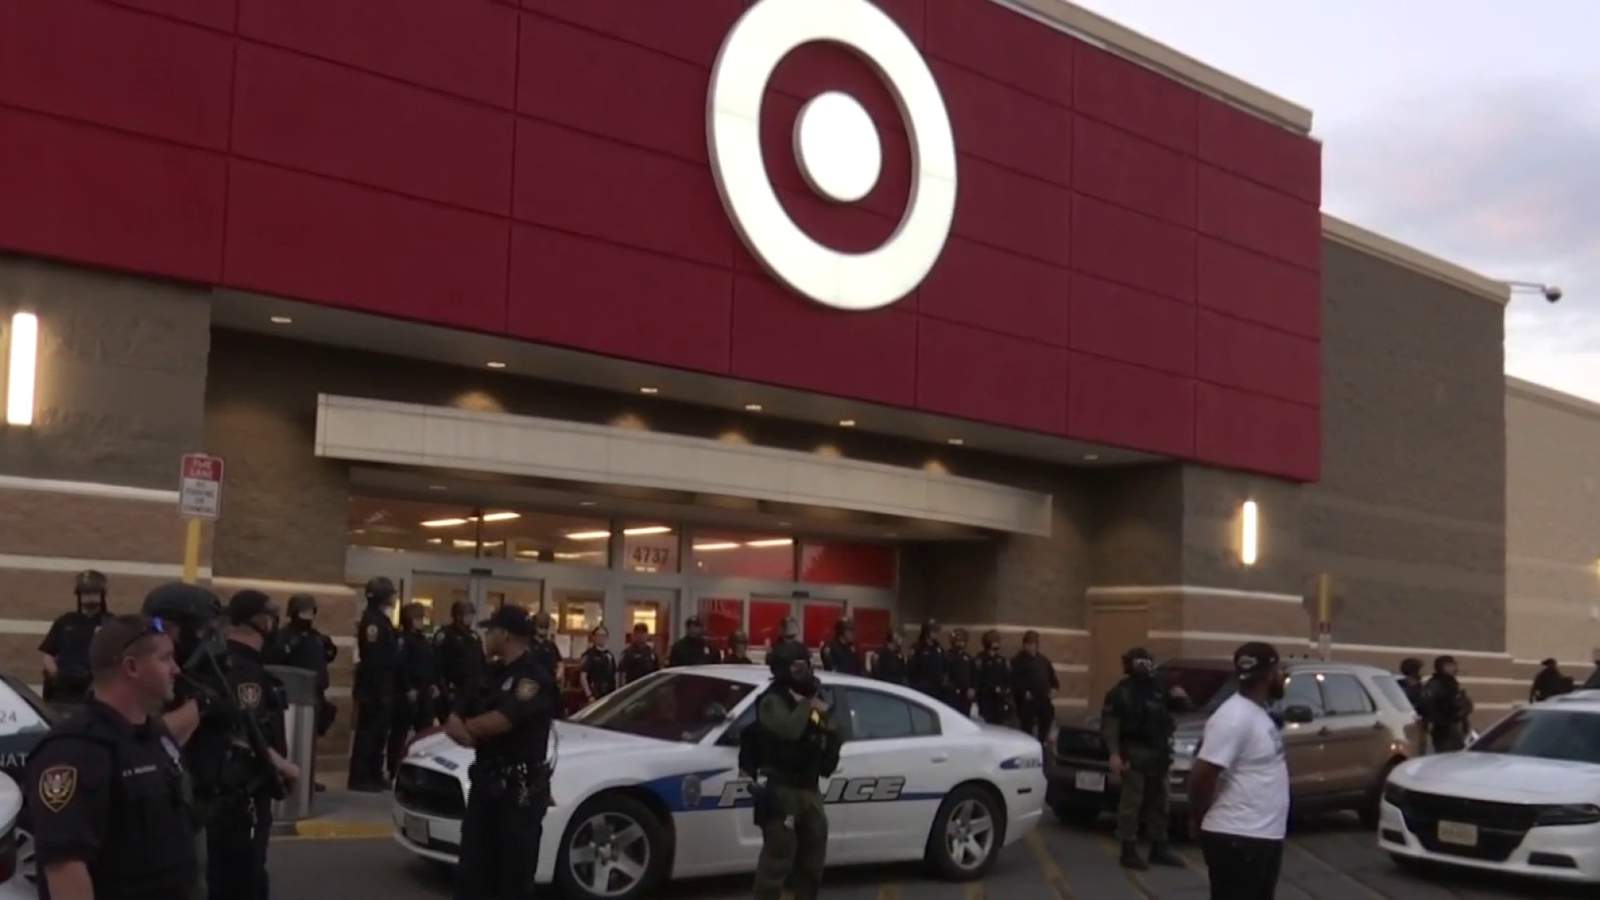 Target temporarily select closing stores, none locally, amid protests